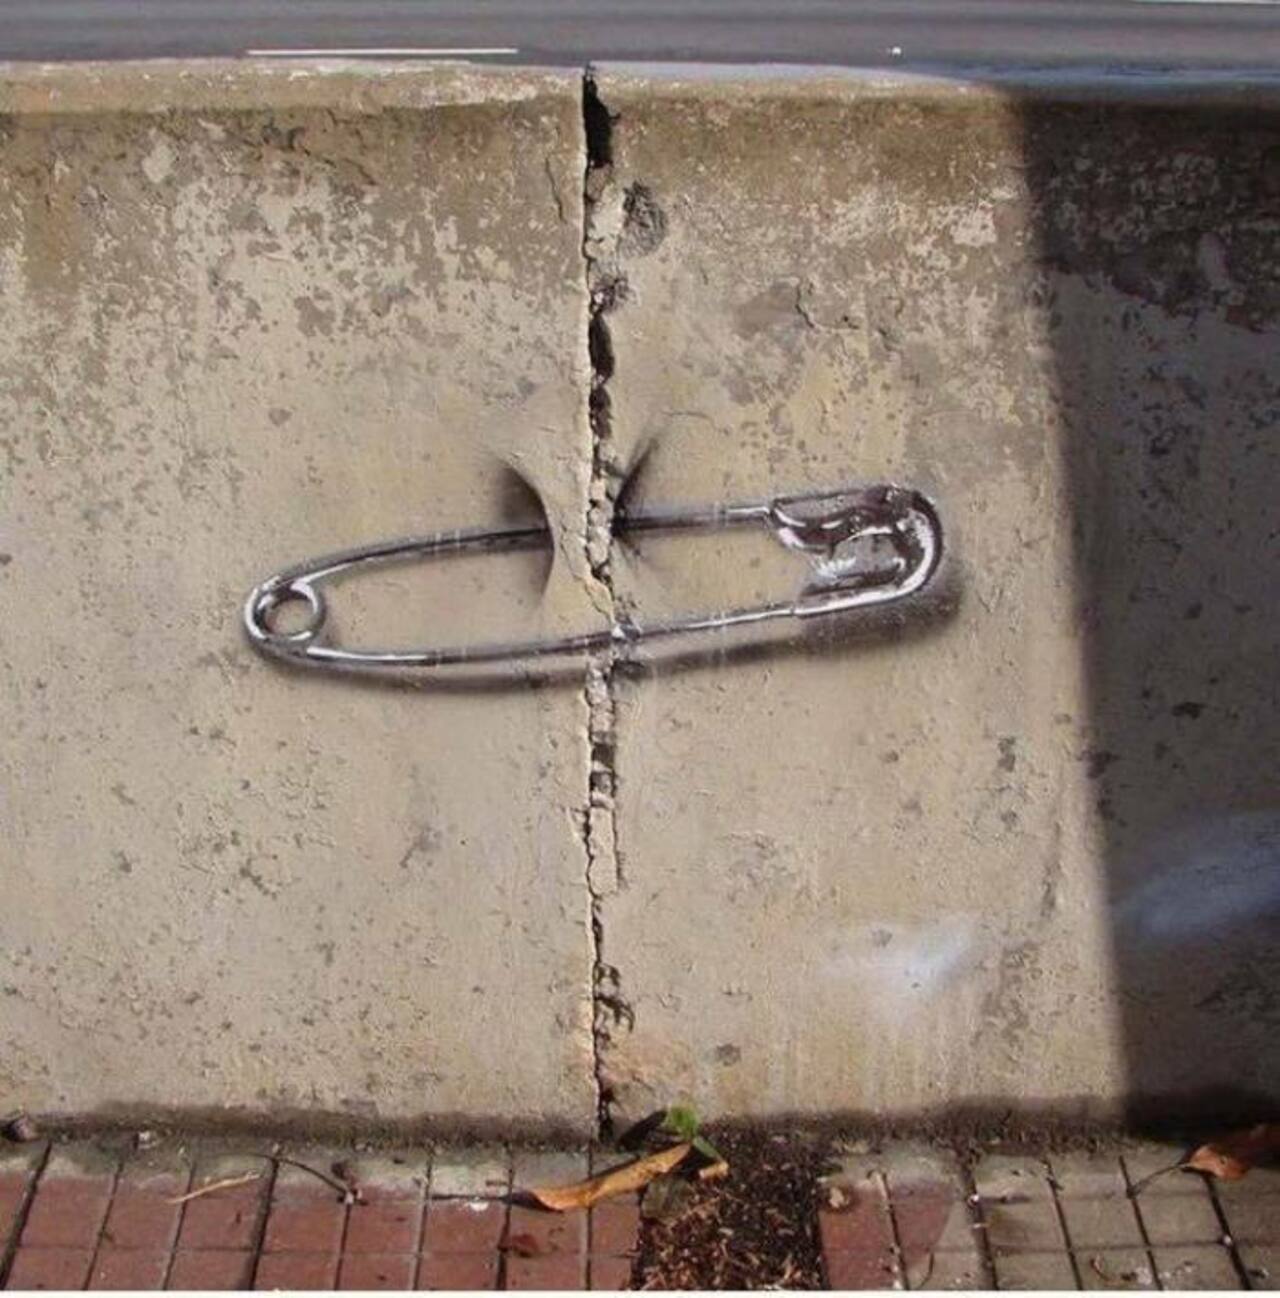 Simple & Beauty – #Creative #Streetart | Be ▲rtist - Be ▲rt https://beartistbeart.com/2016/08/25/simple-beauty-creative-streetart/?utm_campaign=crowdfire&utm_content=crowdfire&utm_medium=social&utm_source=twitter https://t.co/2nTOVVqQpB